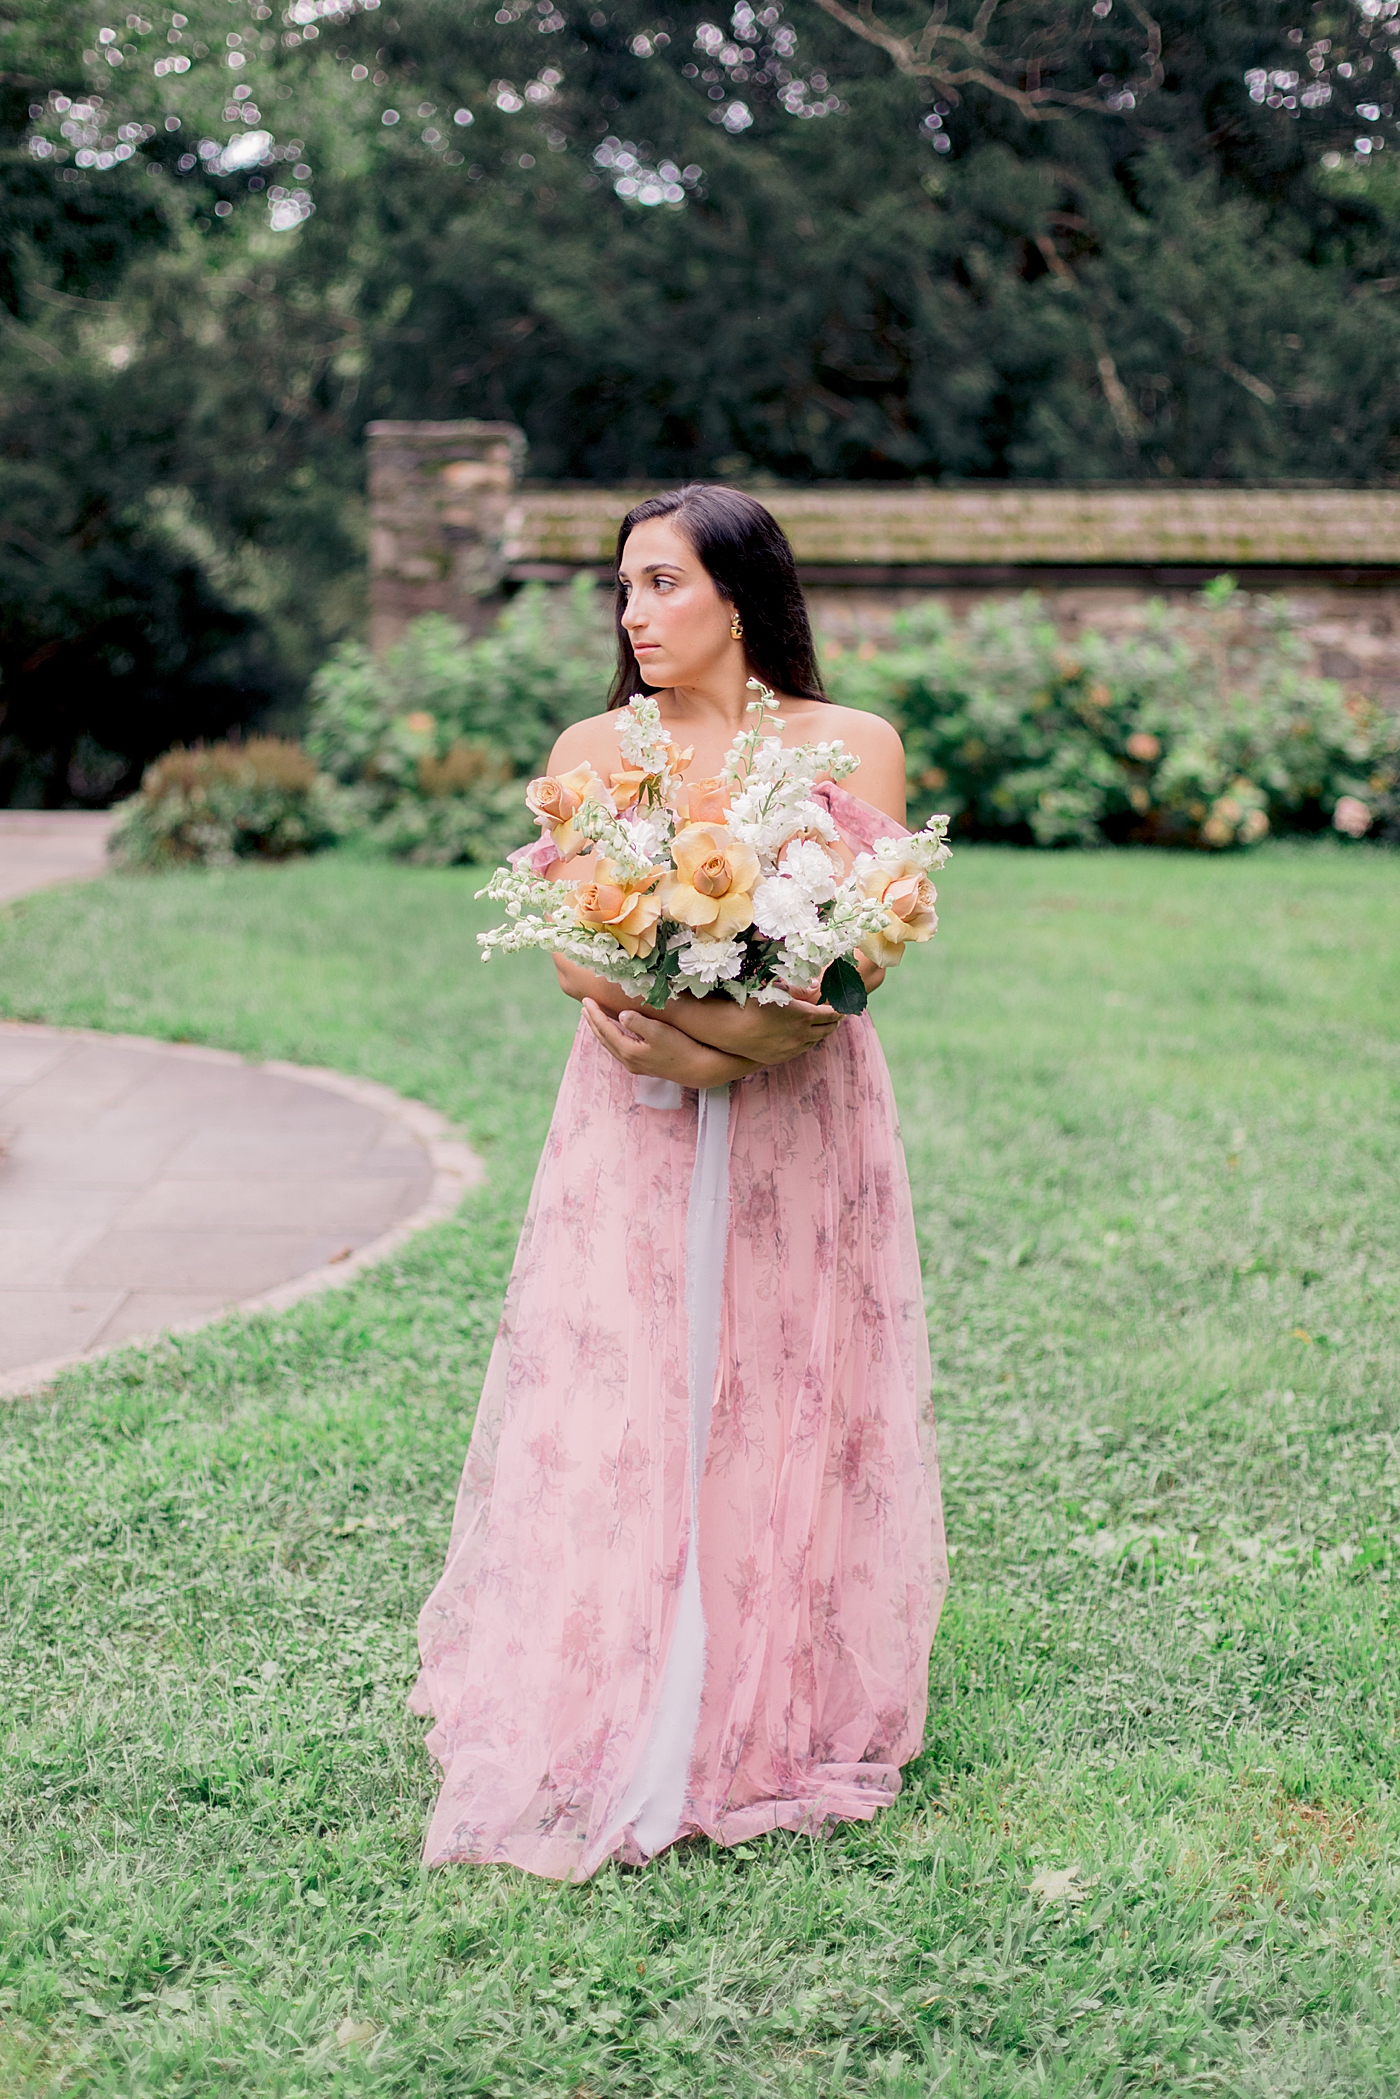 Bride in a pink dress holding a bouquet | Styling and Planning Engagement Sessions with Hope Helmuth Photography